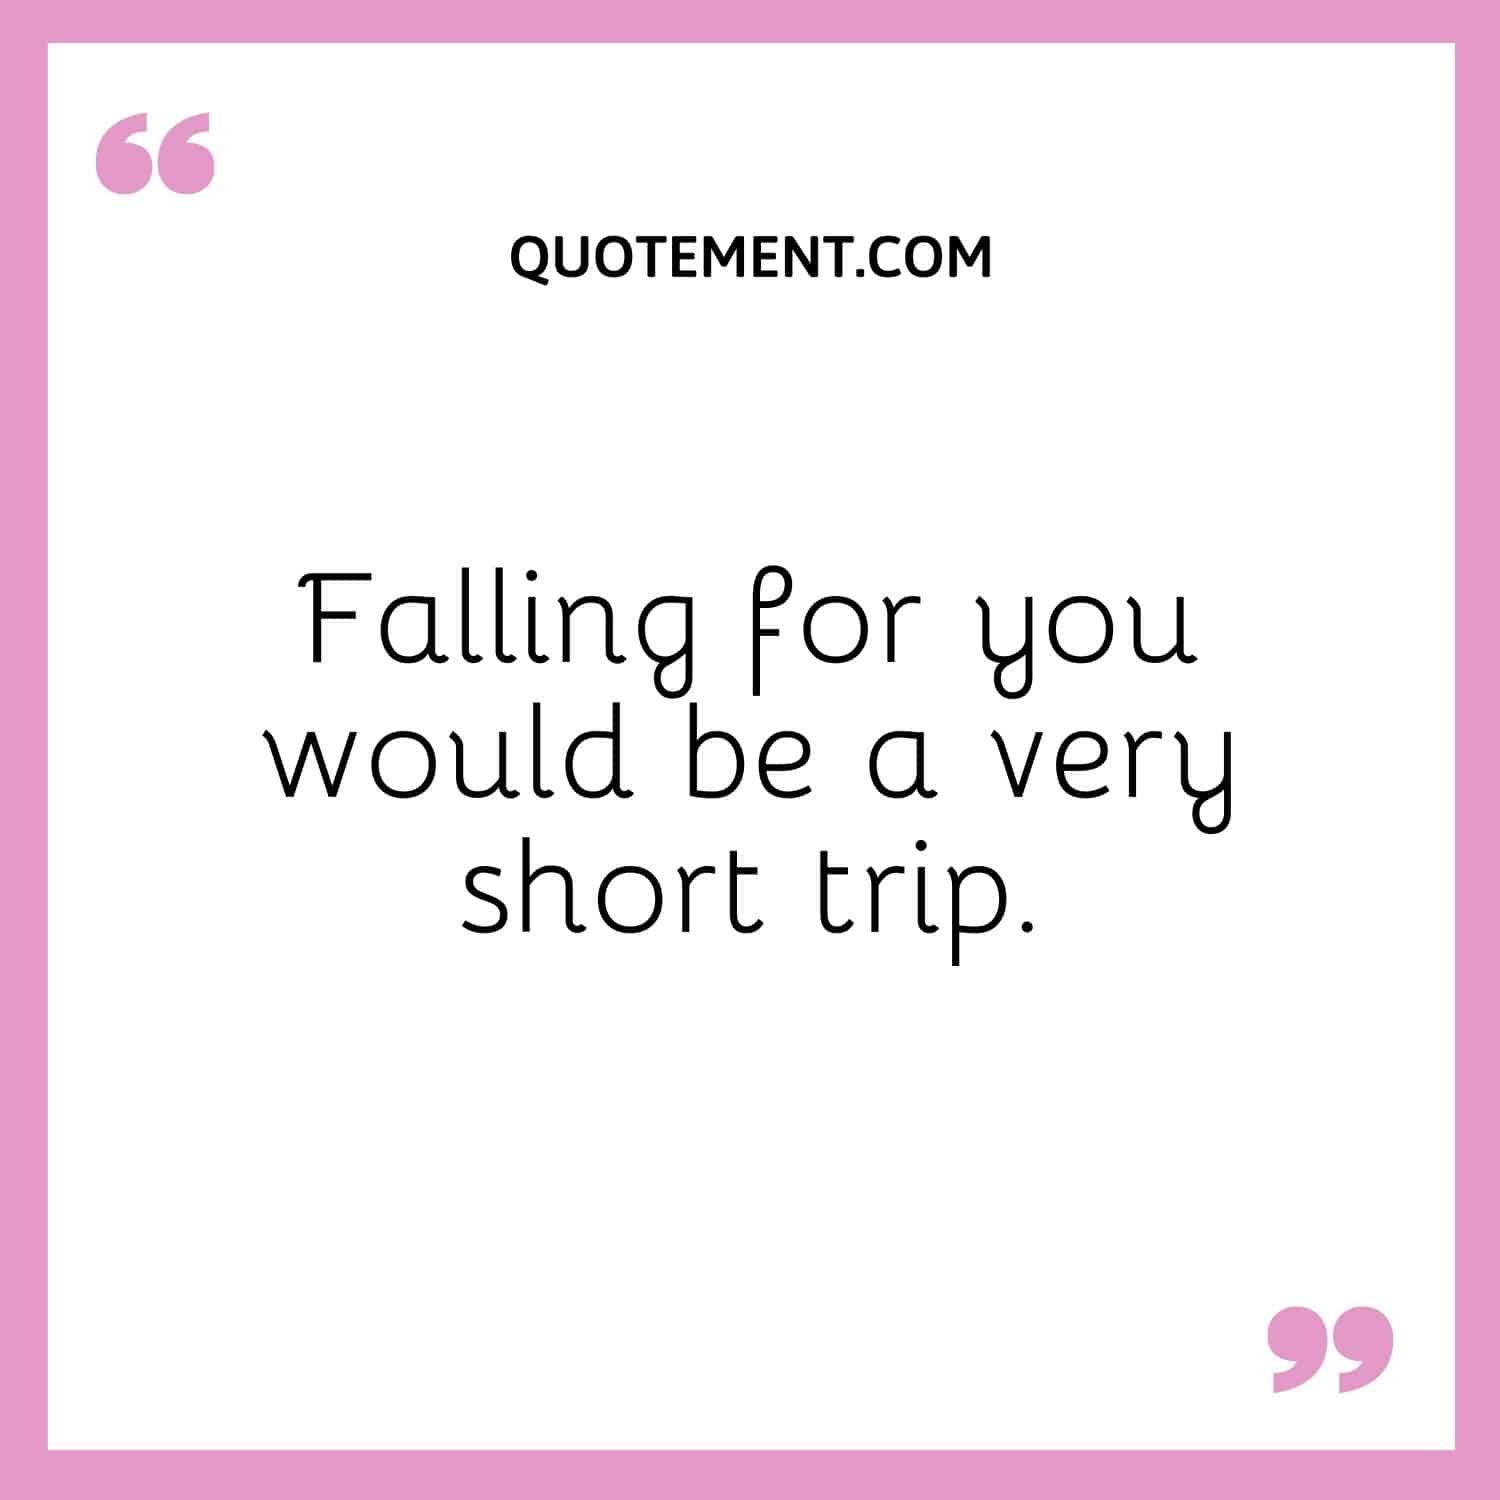 Falling for you would be a very short trip